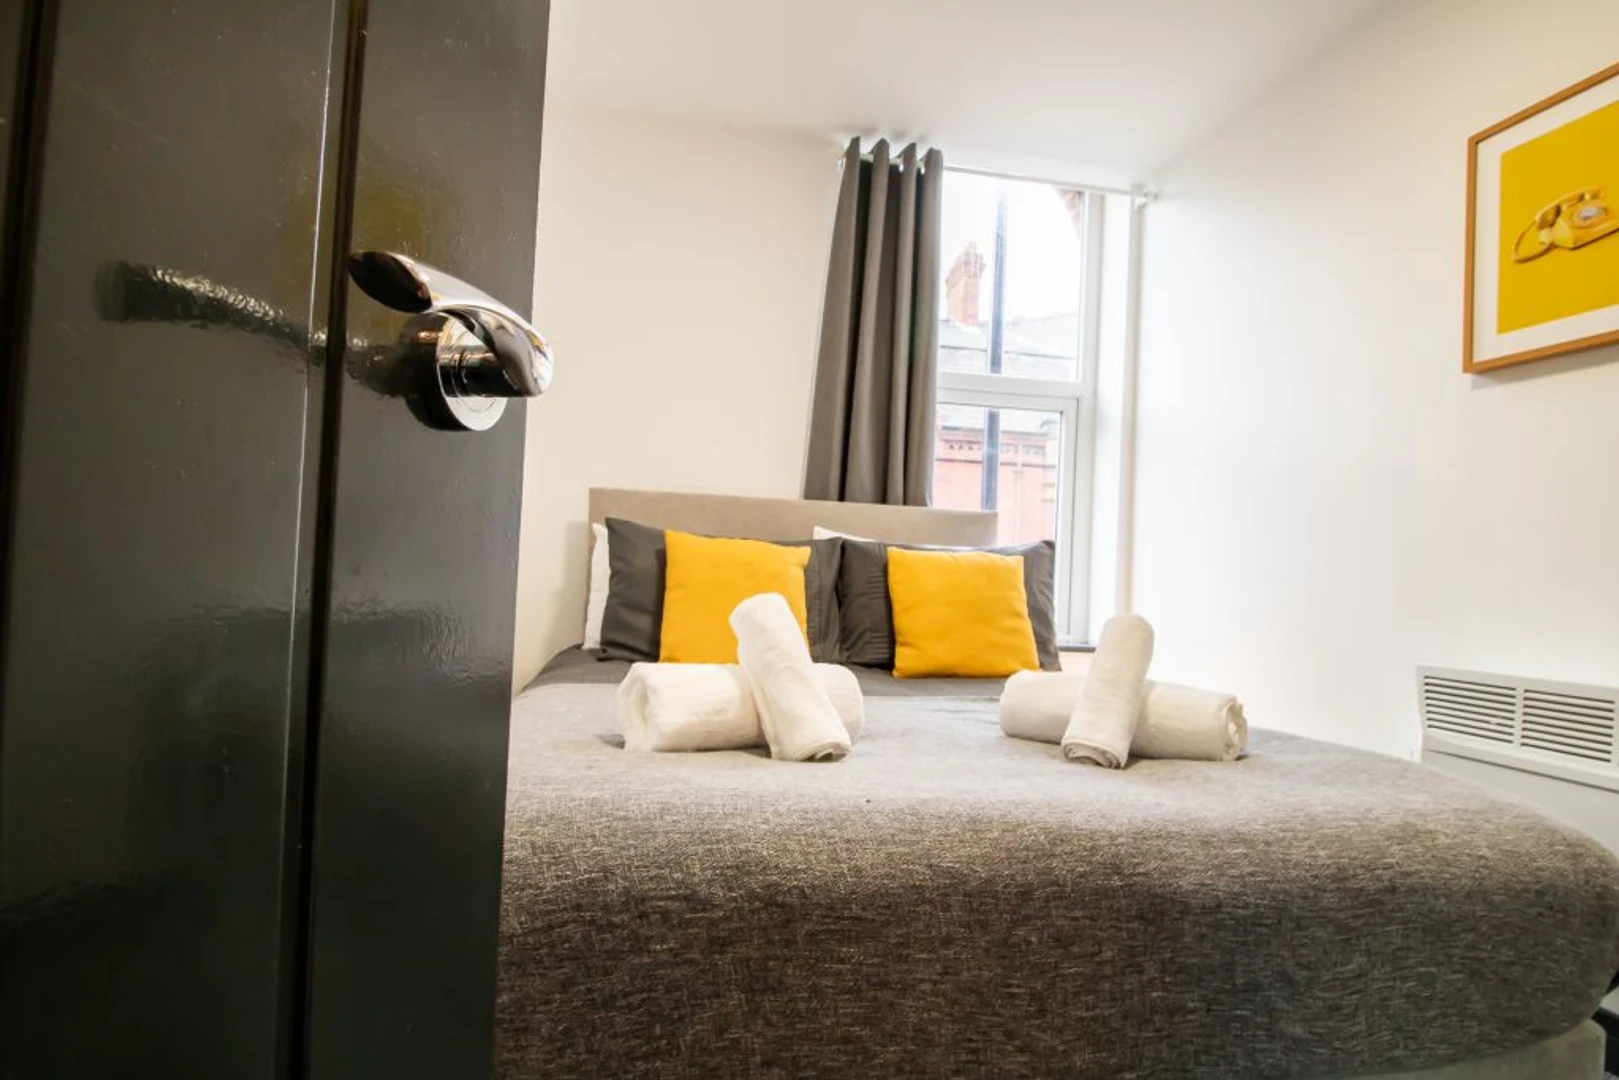 Accommodation with 3 bedrooms in Sunderland